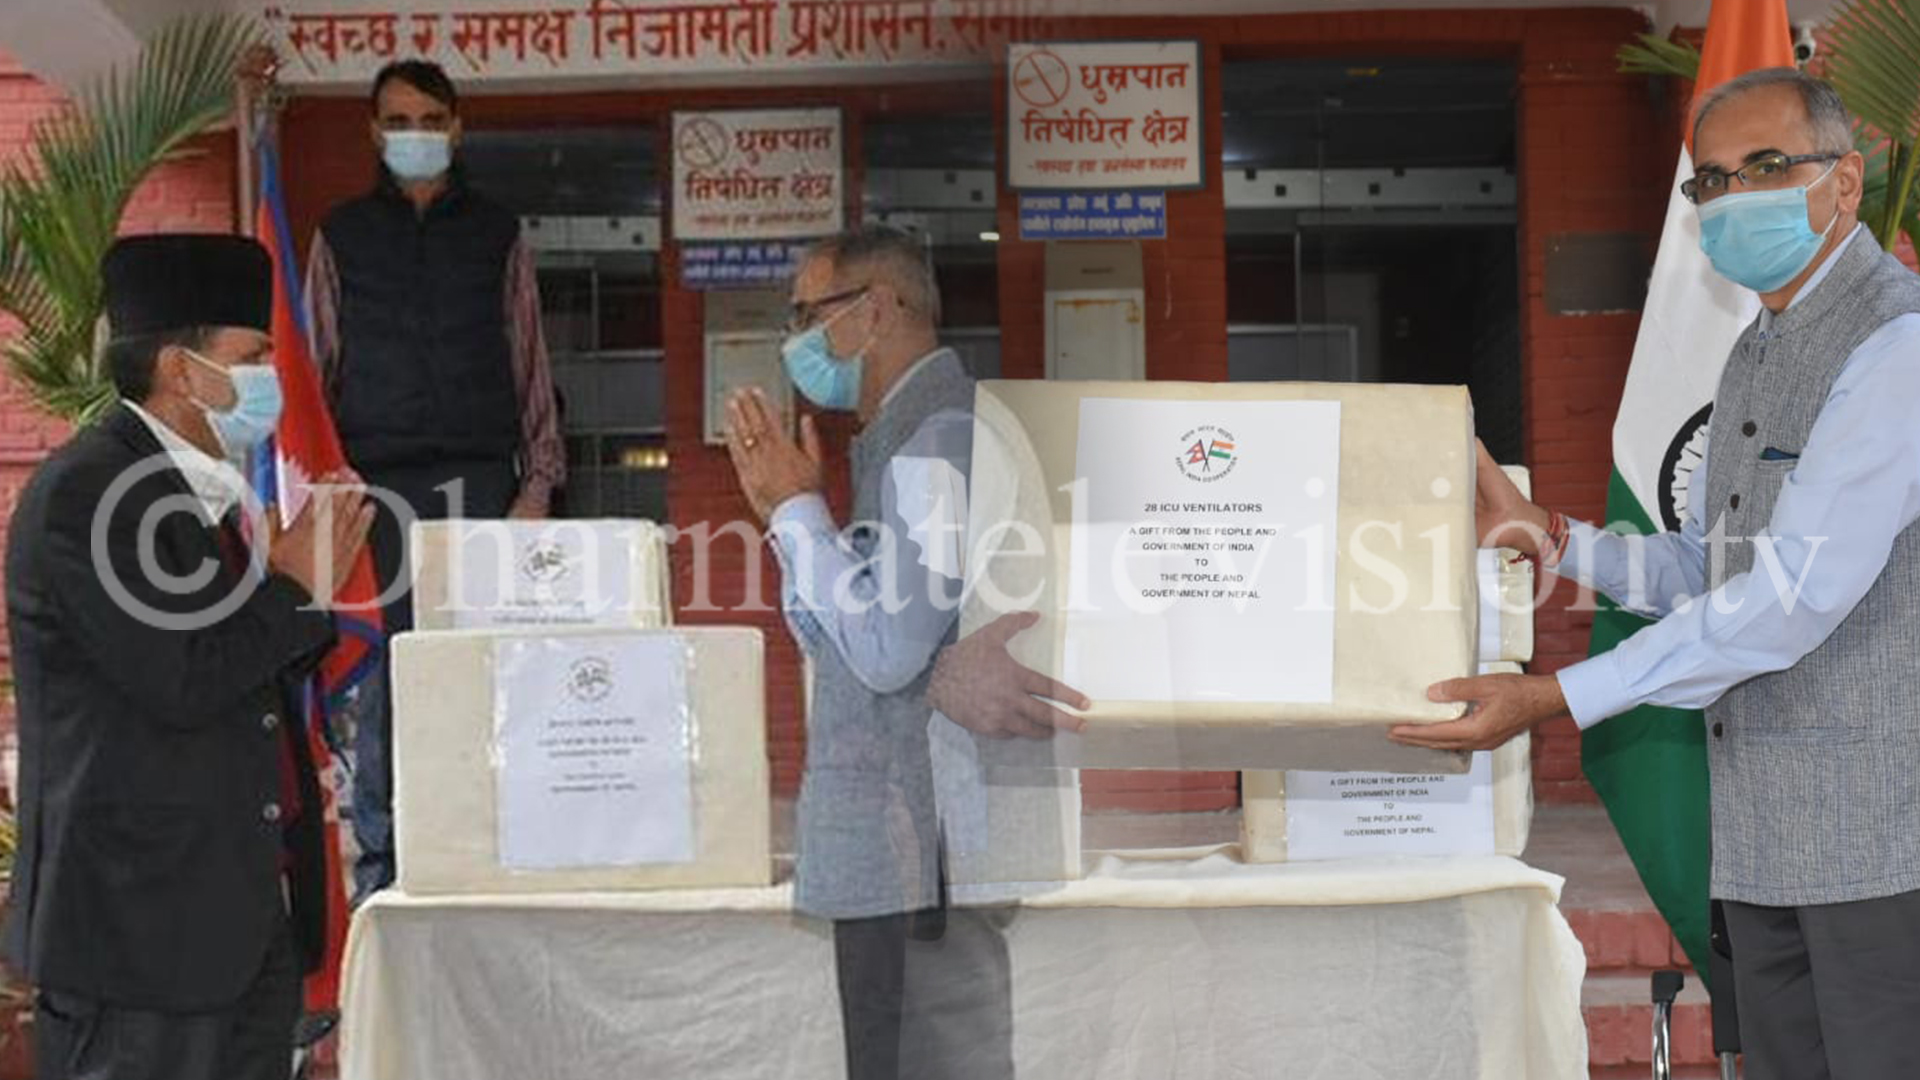 Government of India hands over 28 ventilators to Nepal